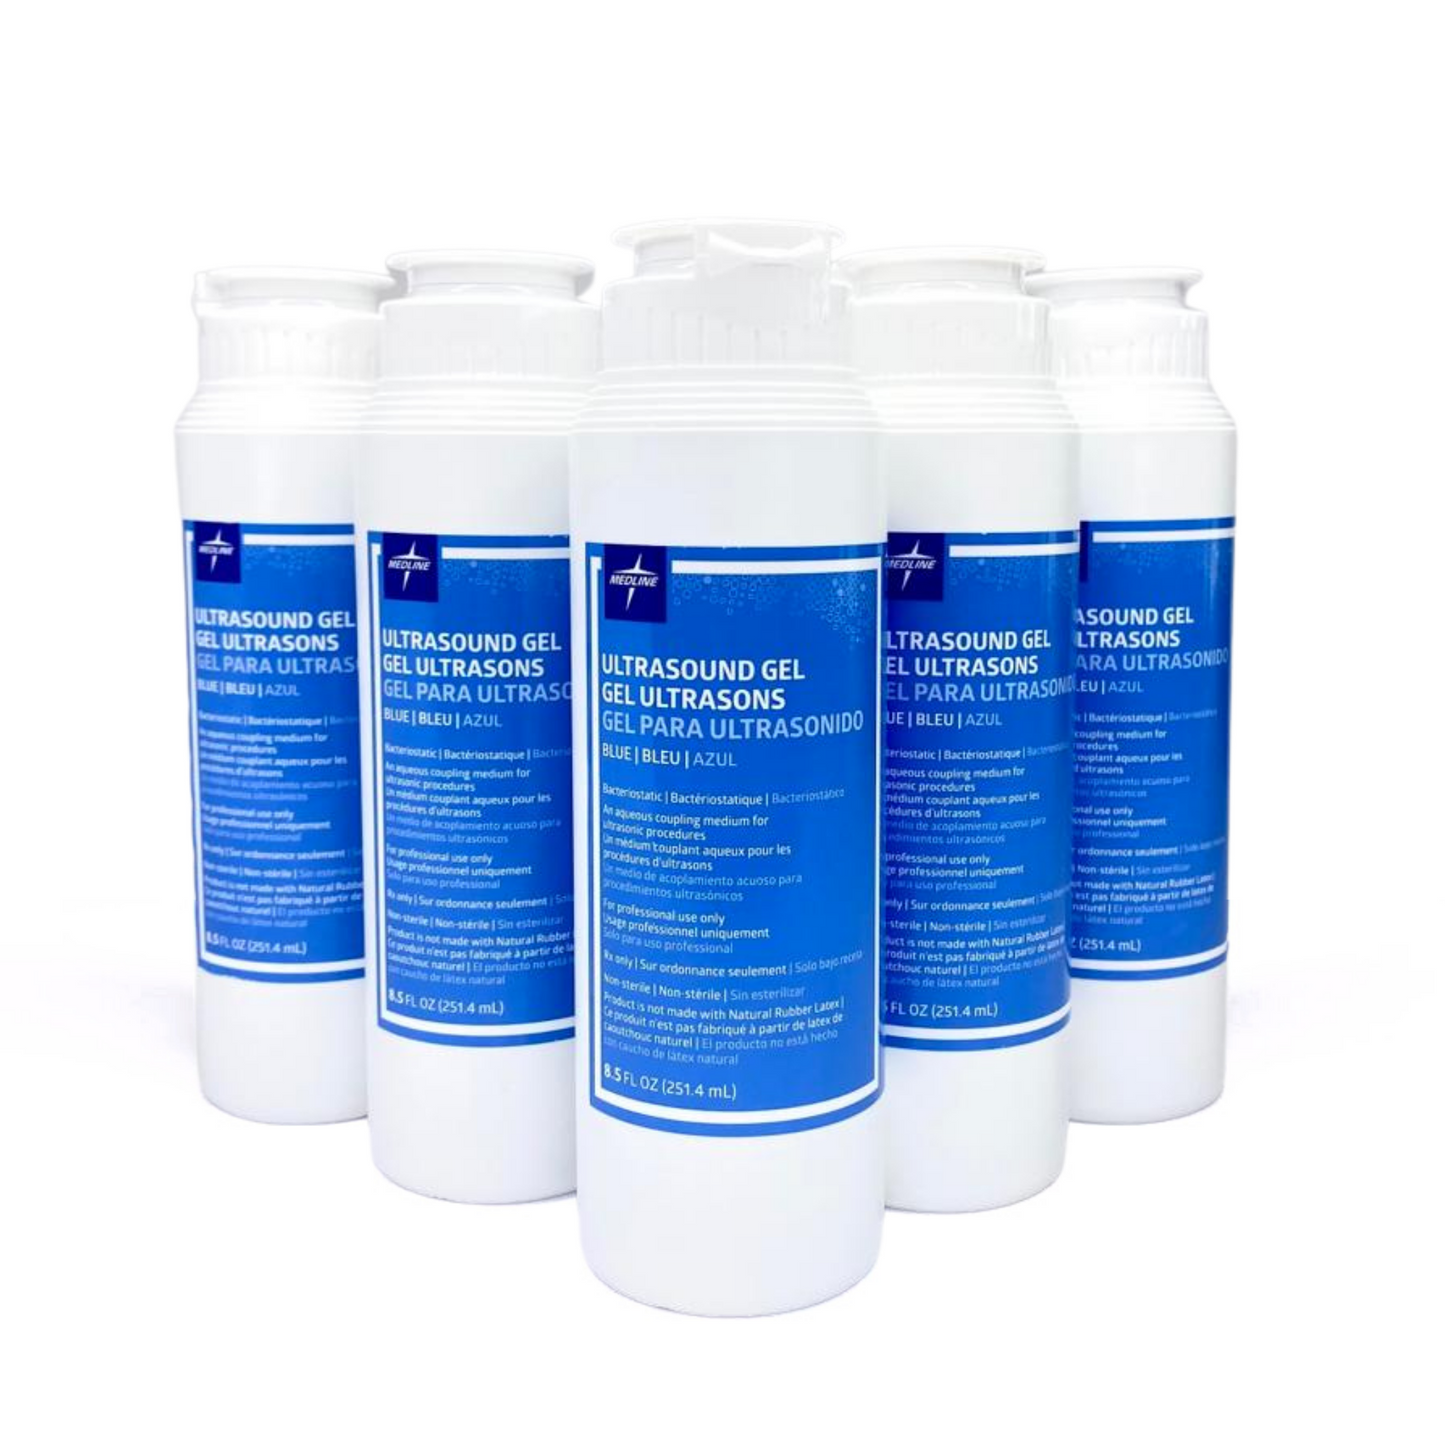 Ultrasound Conductive Gel 8oz (Packs of 3, 5, and 12)